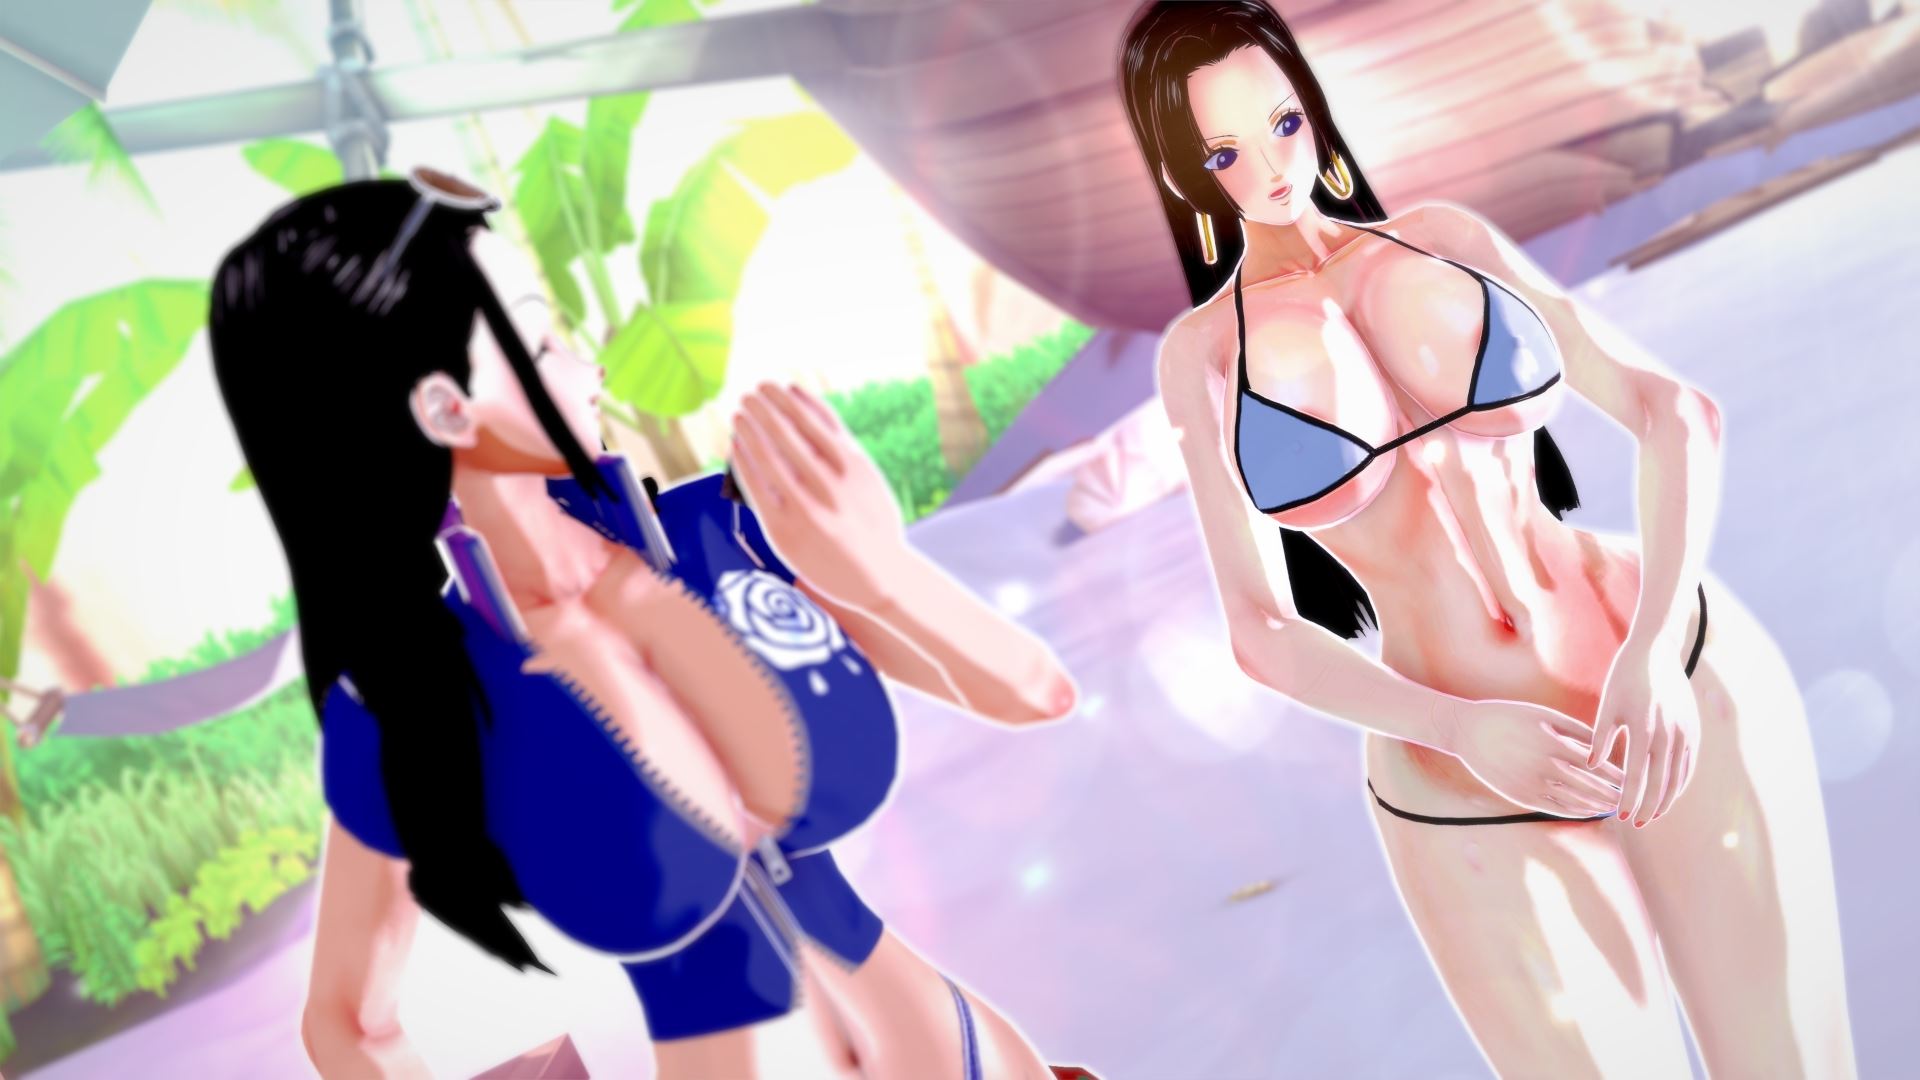 Sex Worl Xxxx - Crossing World Ren'Py Porn Sex Game v.Demo Rework Download for Windows,  MacOS, Linux, Android